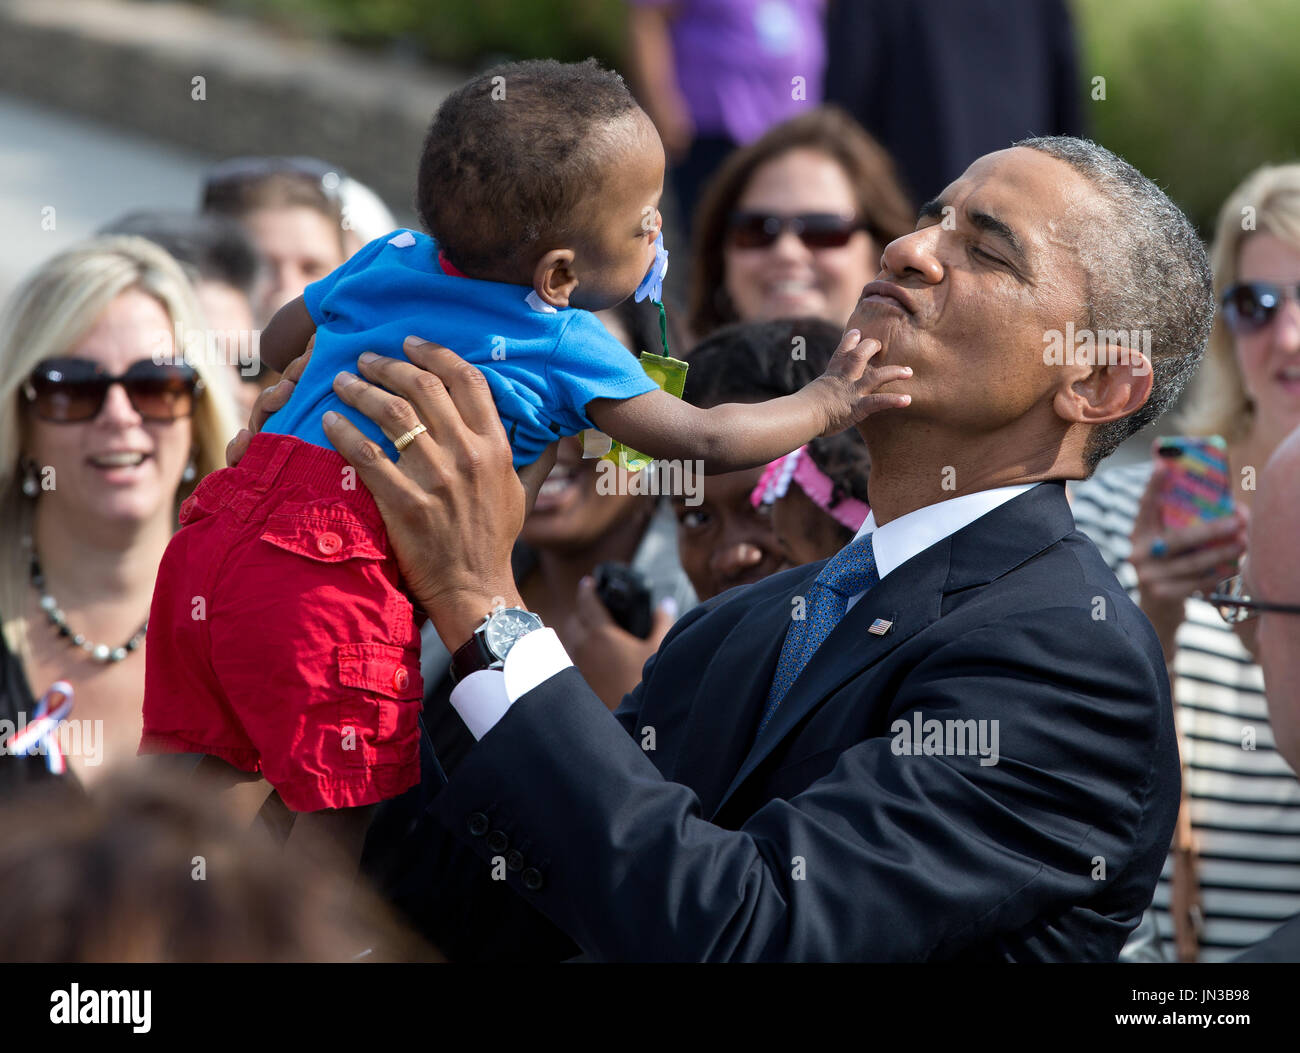 United States President Barack Obama holds up Larnell Maurice Perry, Jr. (13 months) during a ceremony at the Pentagon to mark the 13th anniversary of the September 11th, 2001 terrorist attacks, in Washington, Thursday, September 11, 2014. The boy is the grandson of Angeline C. Carter, who died in the Pentagon attack on September 11, 2001. Credit: Martin Simon / Pool via CNP Stock Photo